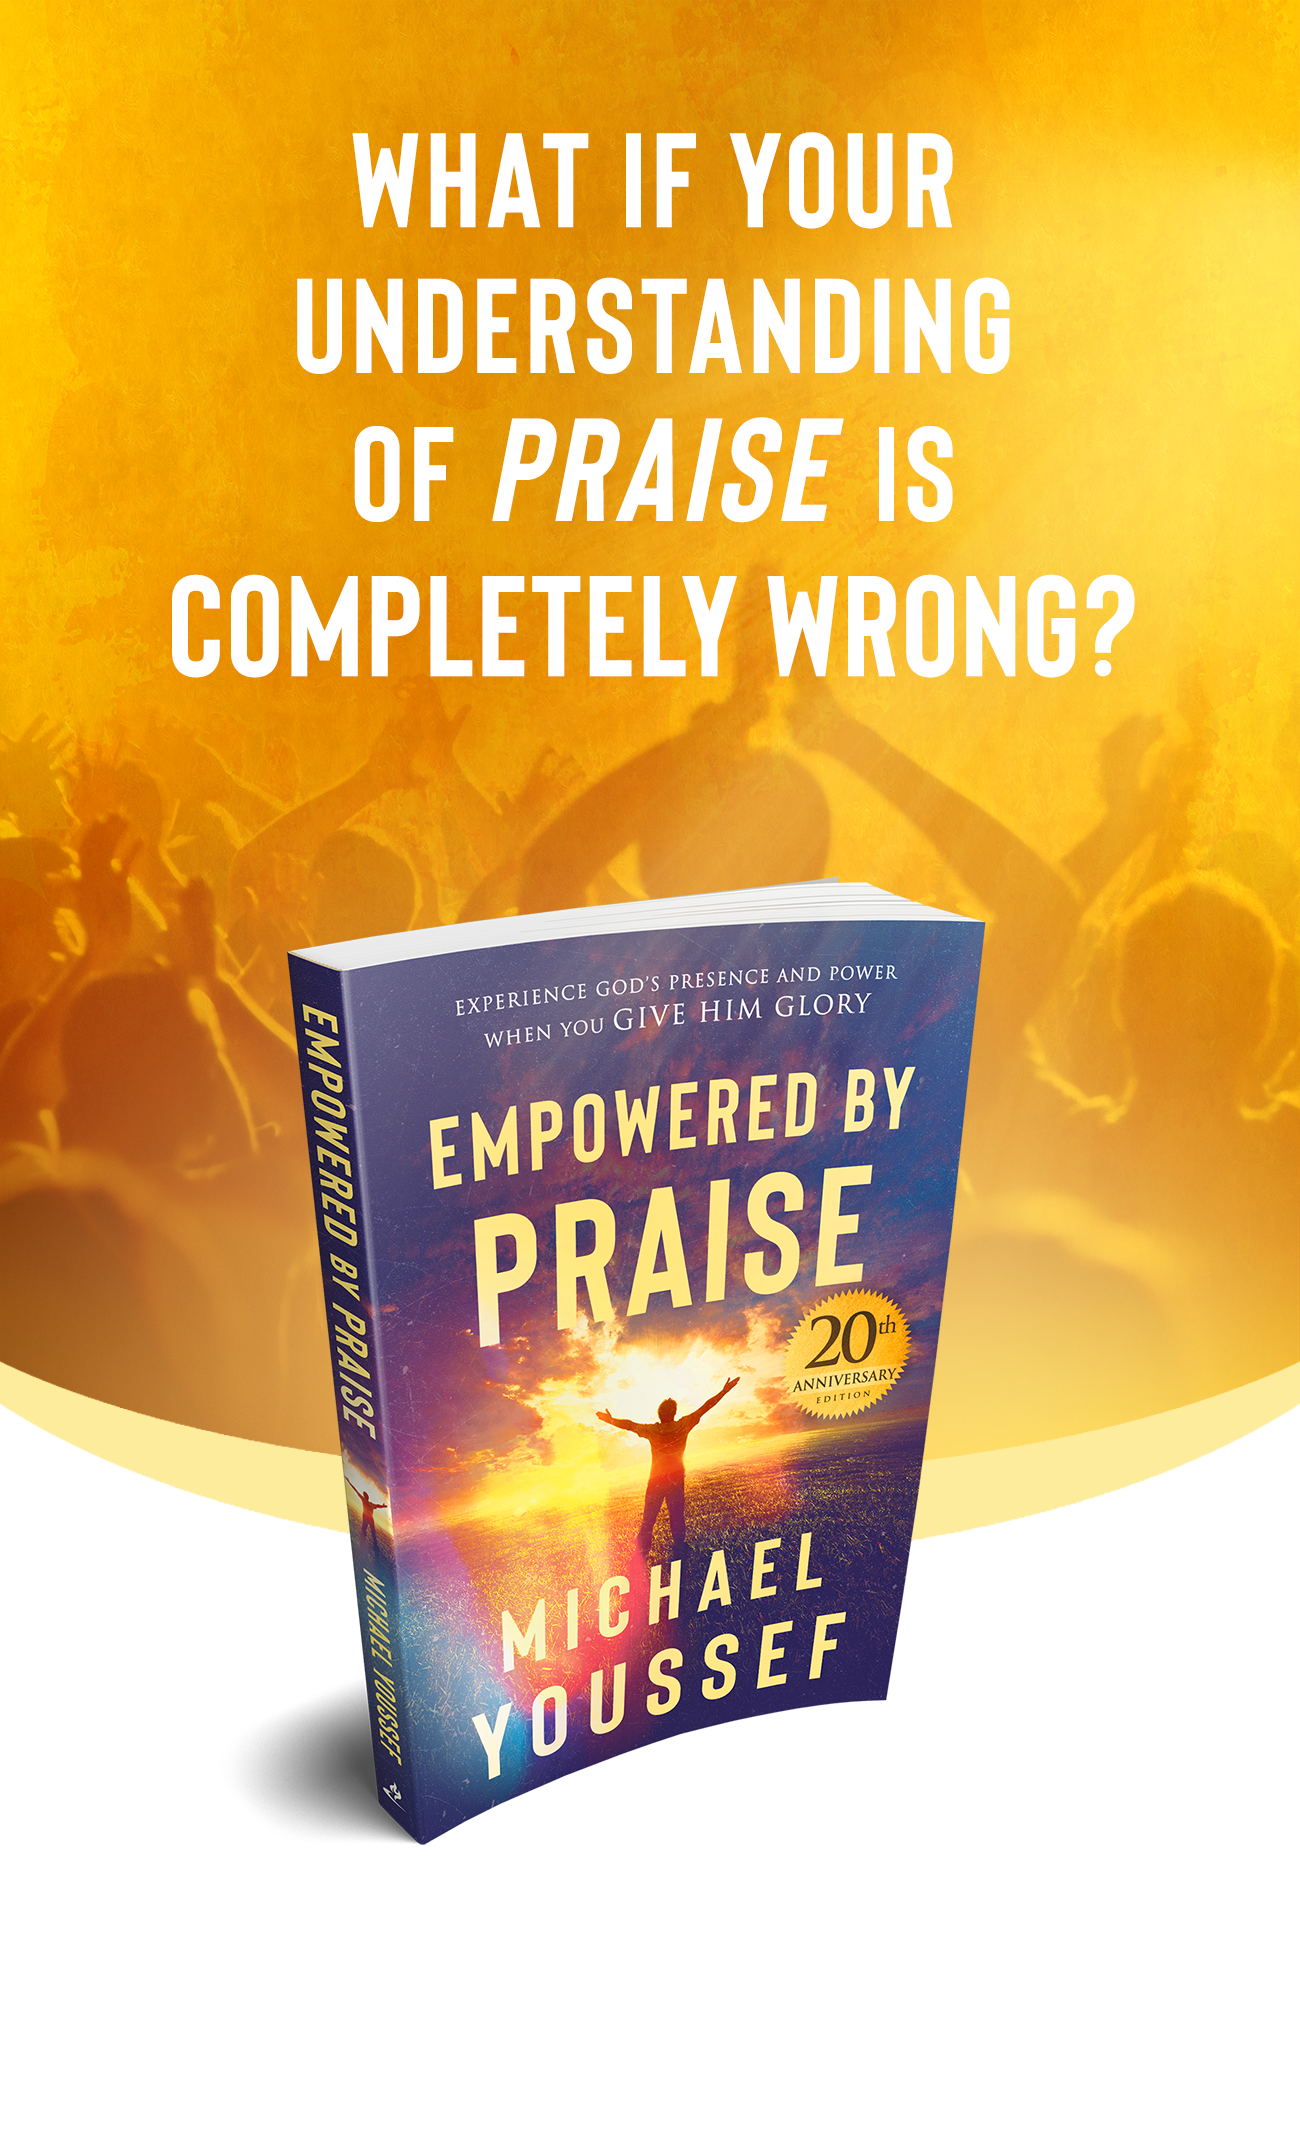 what if your understanding of praise is completely wrong?